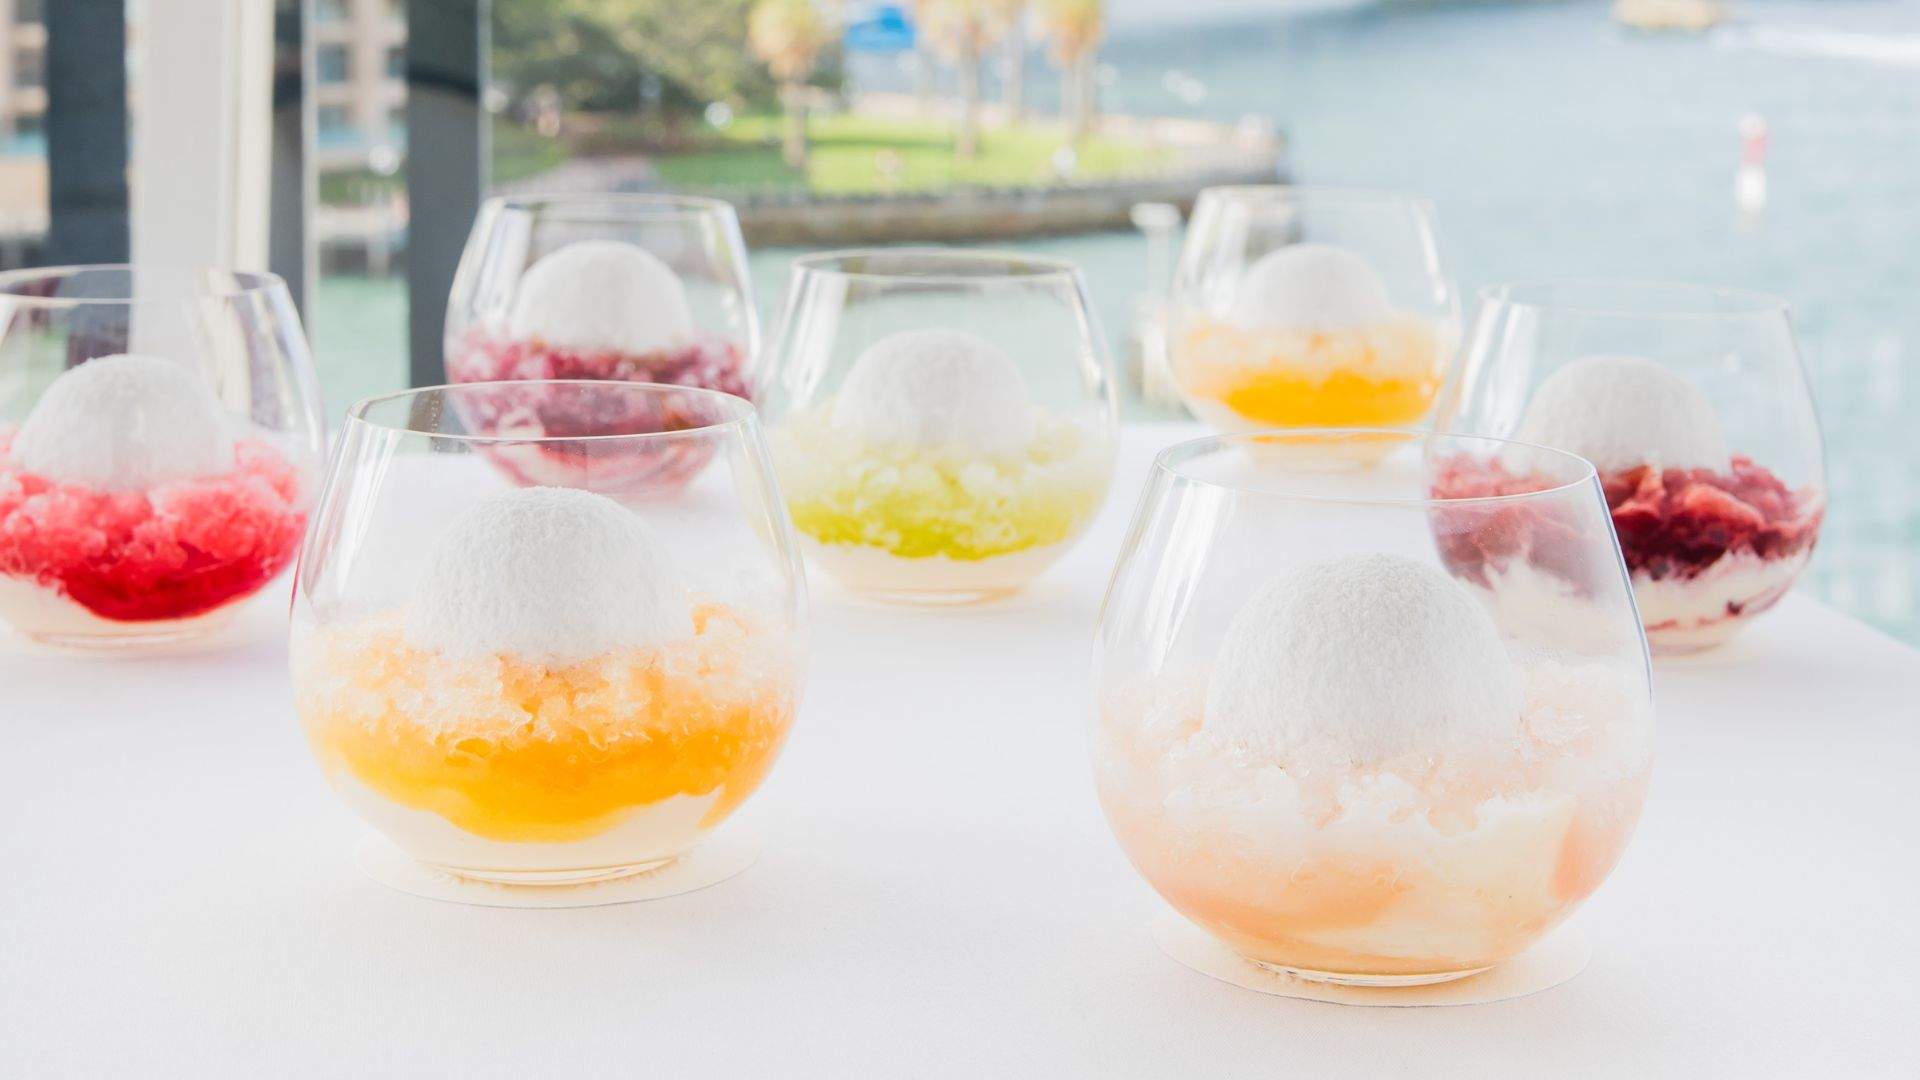 Variations of the Snow Egg dessert, created by Executive Chef Peter Gilmore, at Quay Restaurant. 